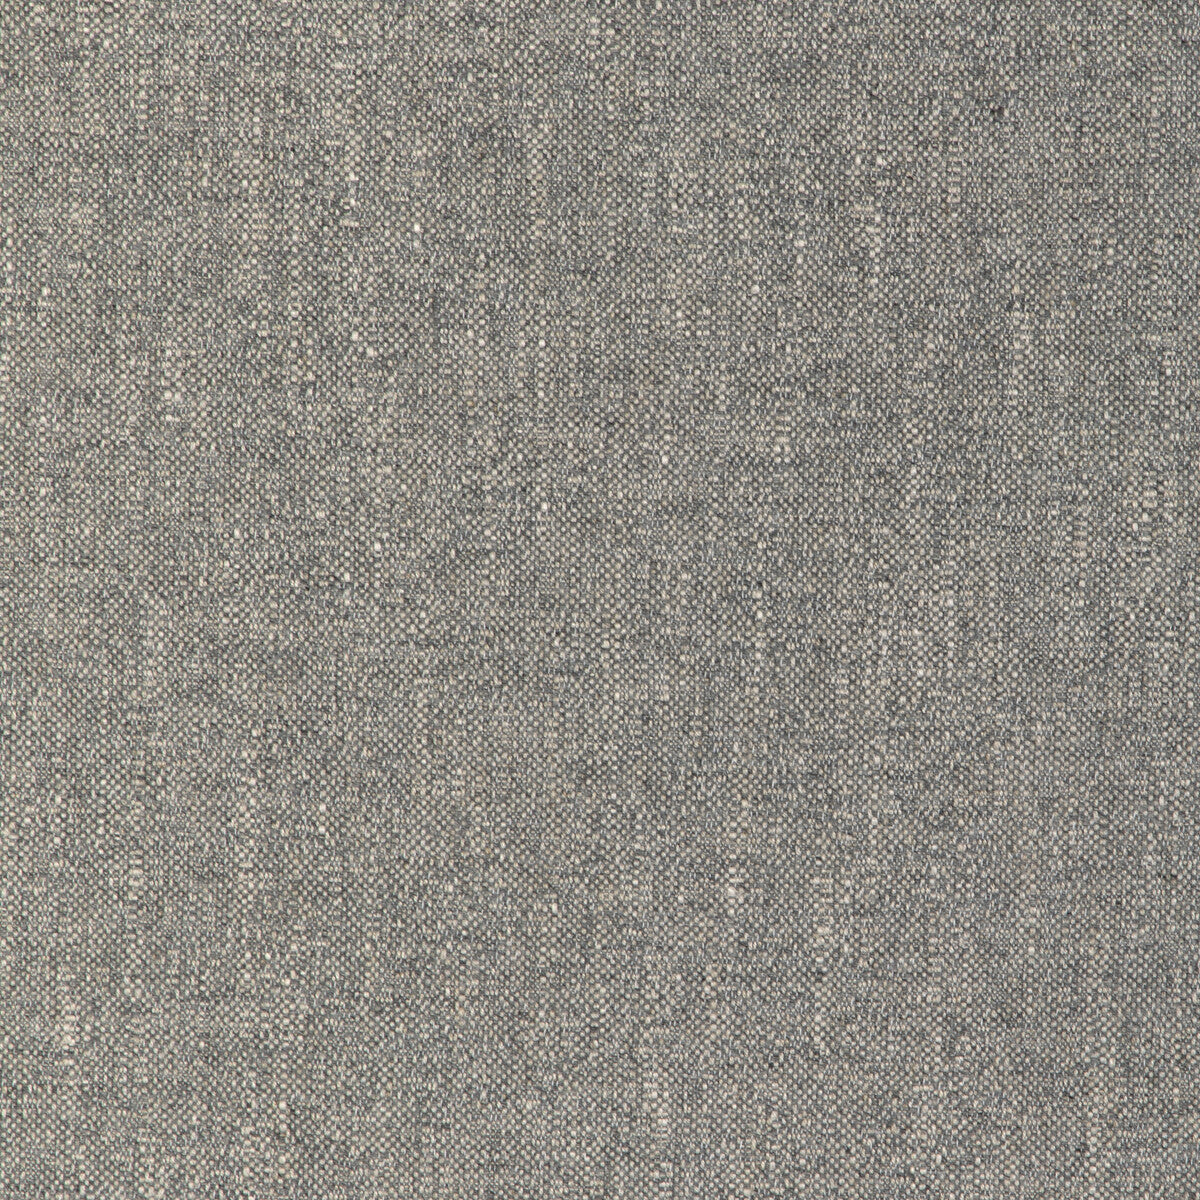 Kravet Design fabric in 36968-1101 color - pattern 36968.1101.0 - by Kravet Design in the Sustainable Textures II collection